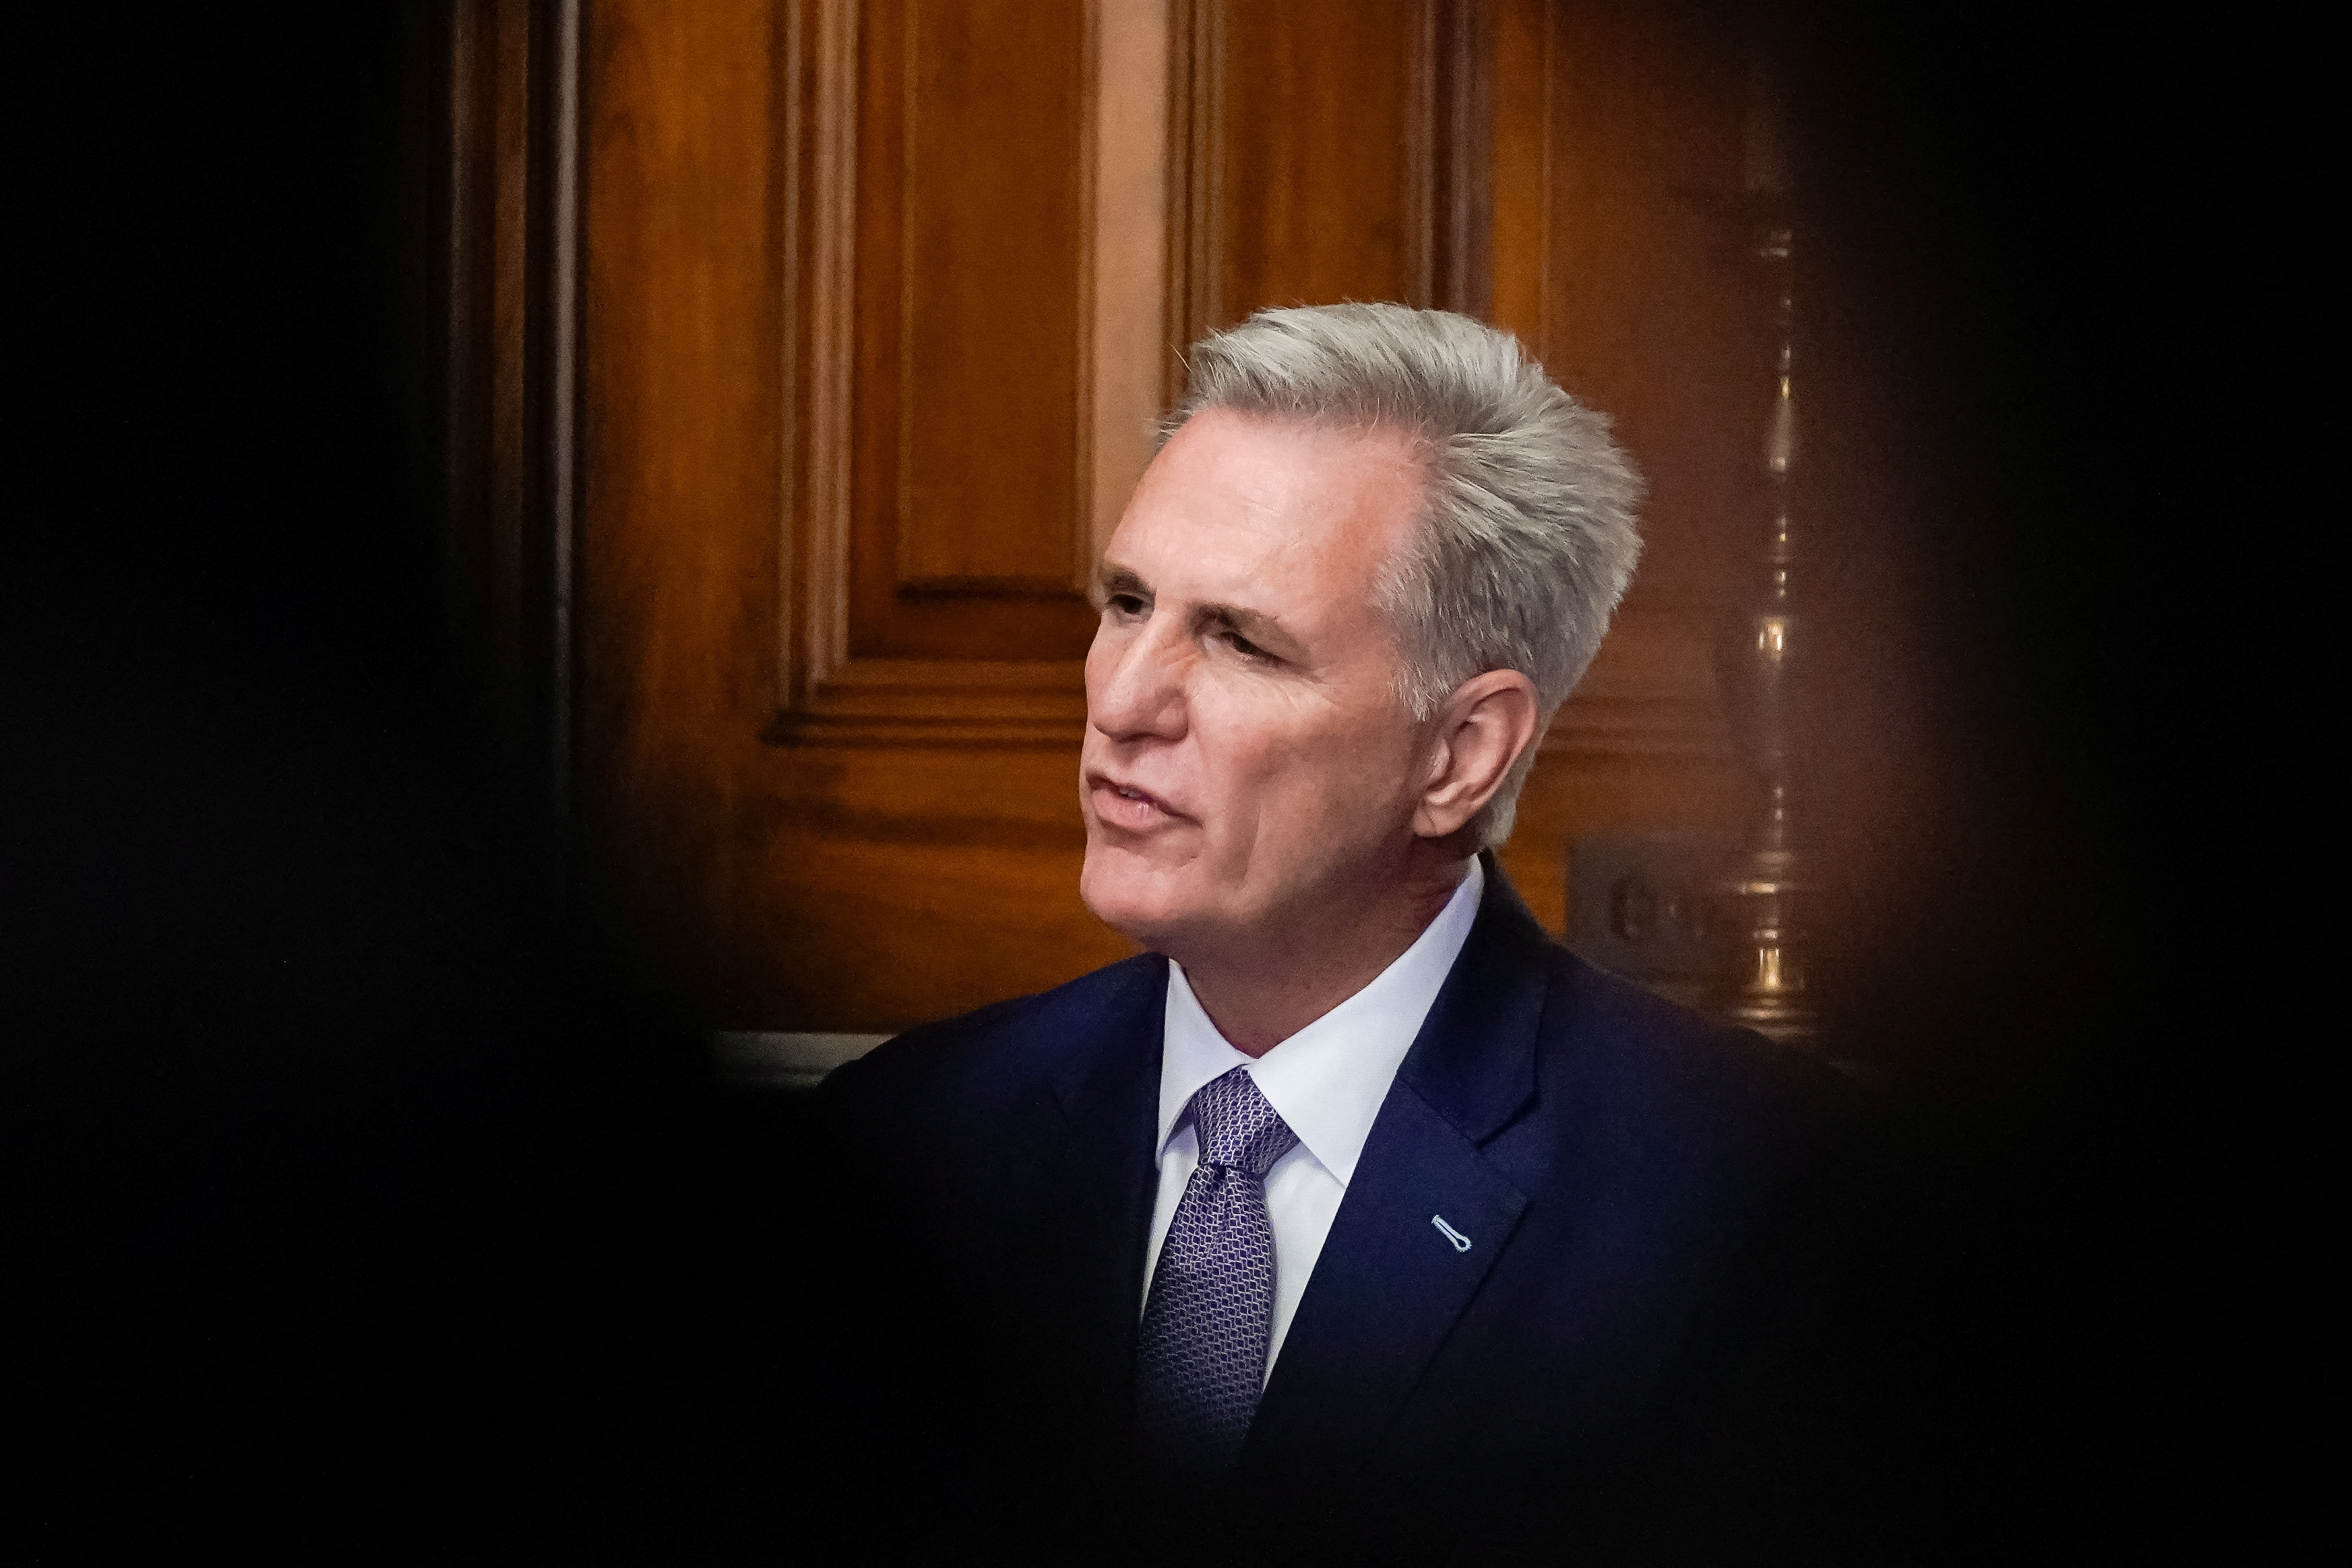 U.S. House Speaker Kevin McCarthy speaks to reporters in the U.S. Capitol after the House of Representatives passed a stopgap government funding bill to avert an immediate government shutdown, on Capitol Hill